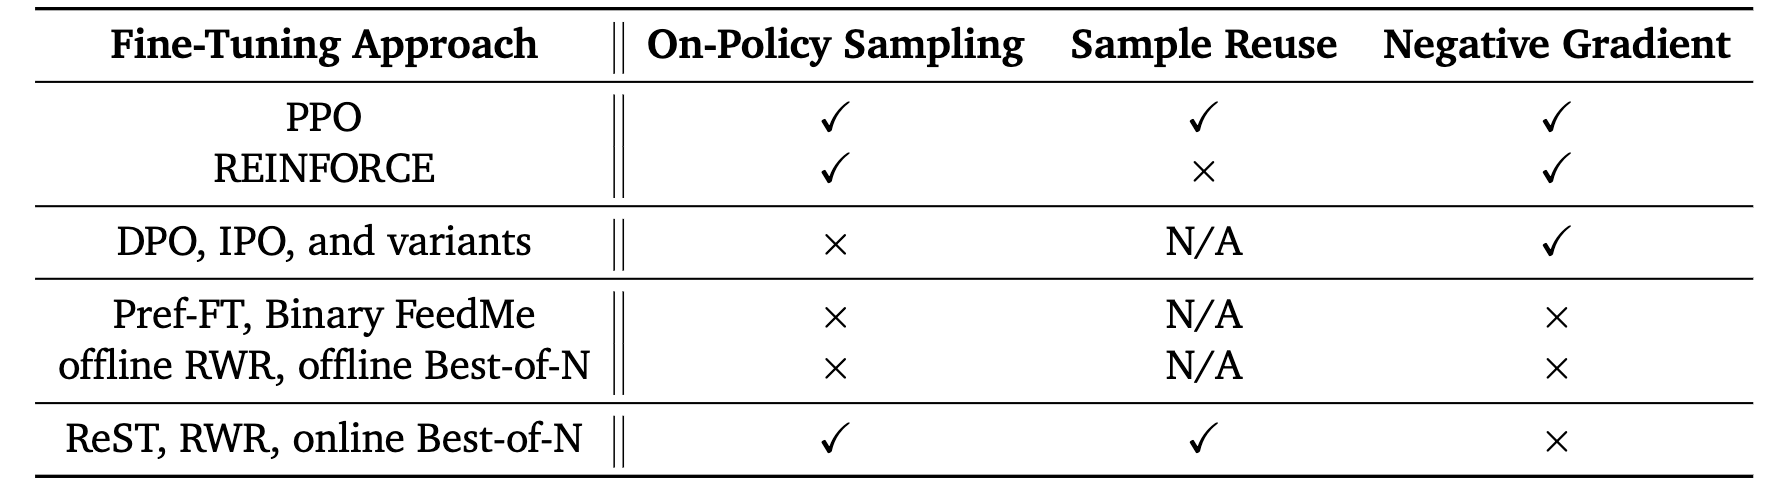 On-Policy Sampling.